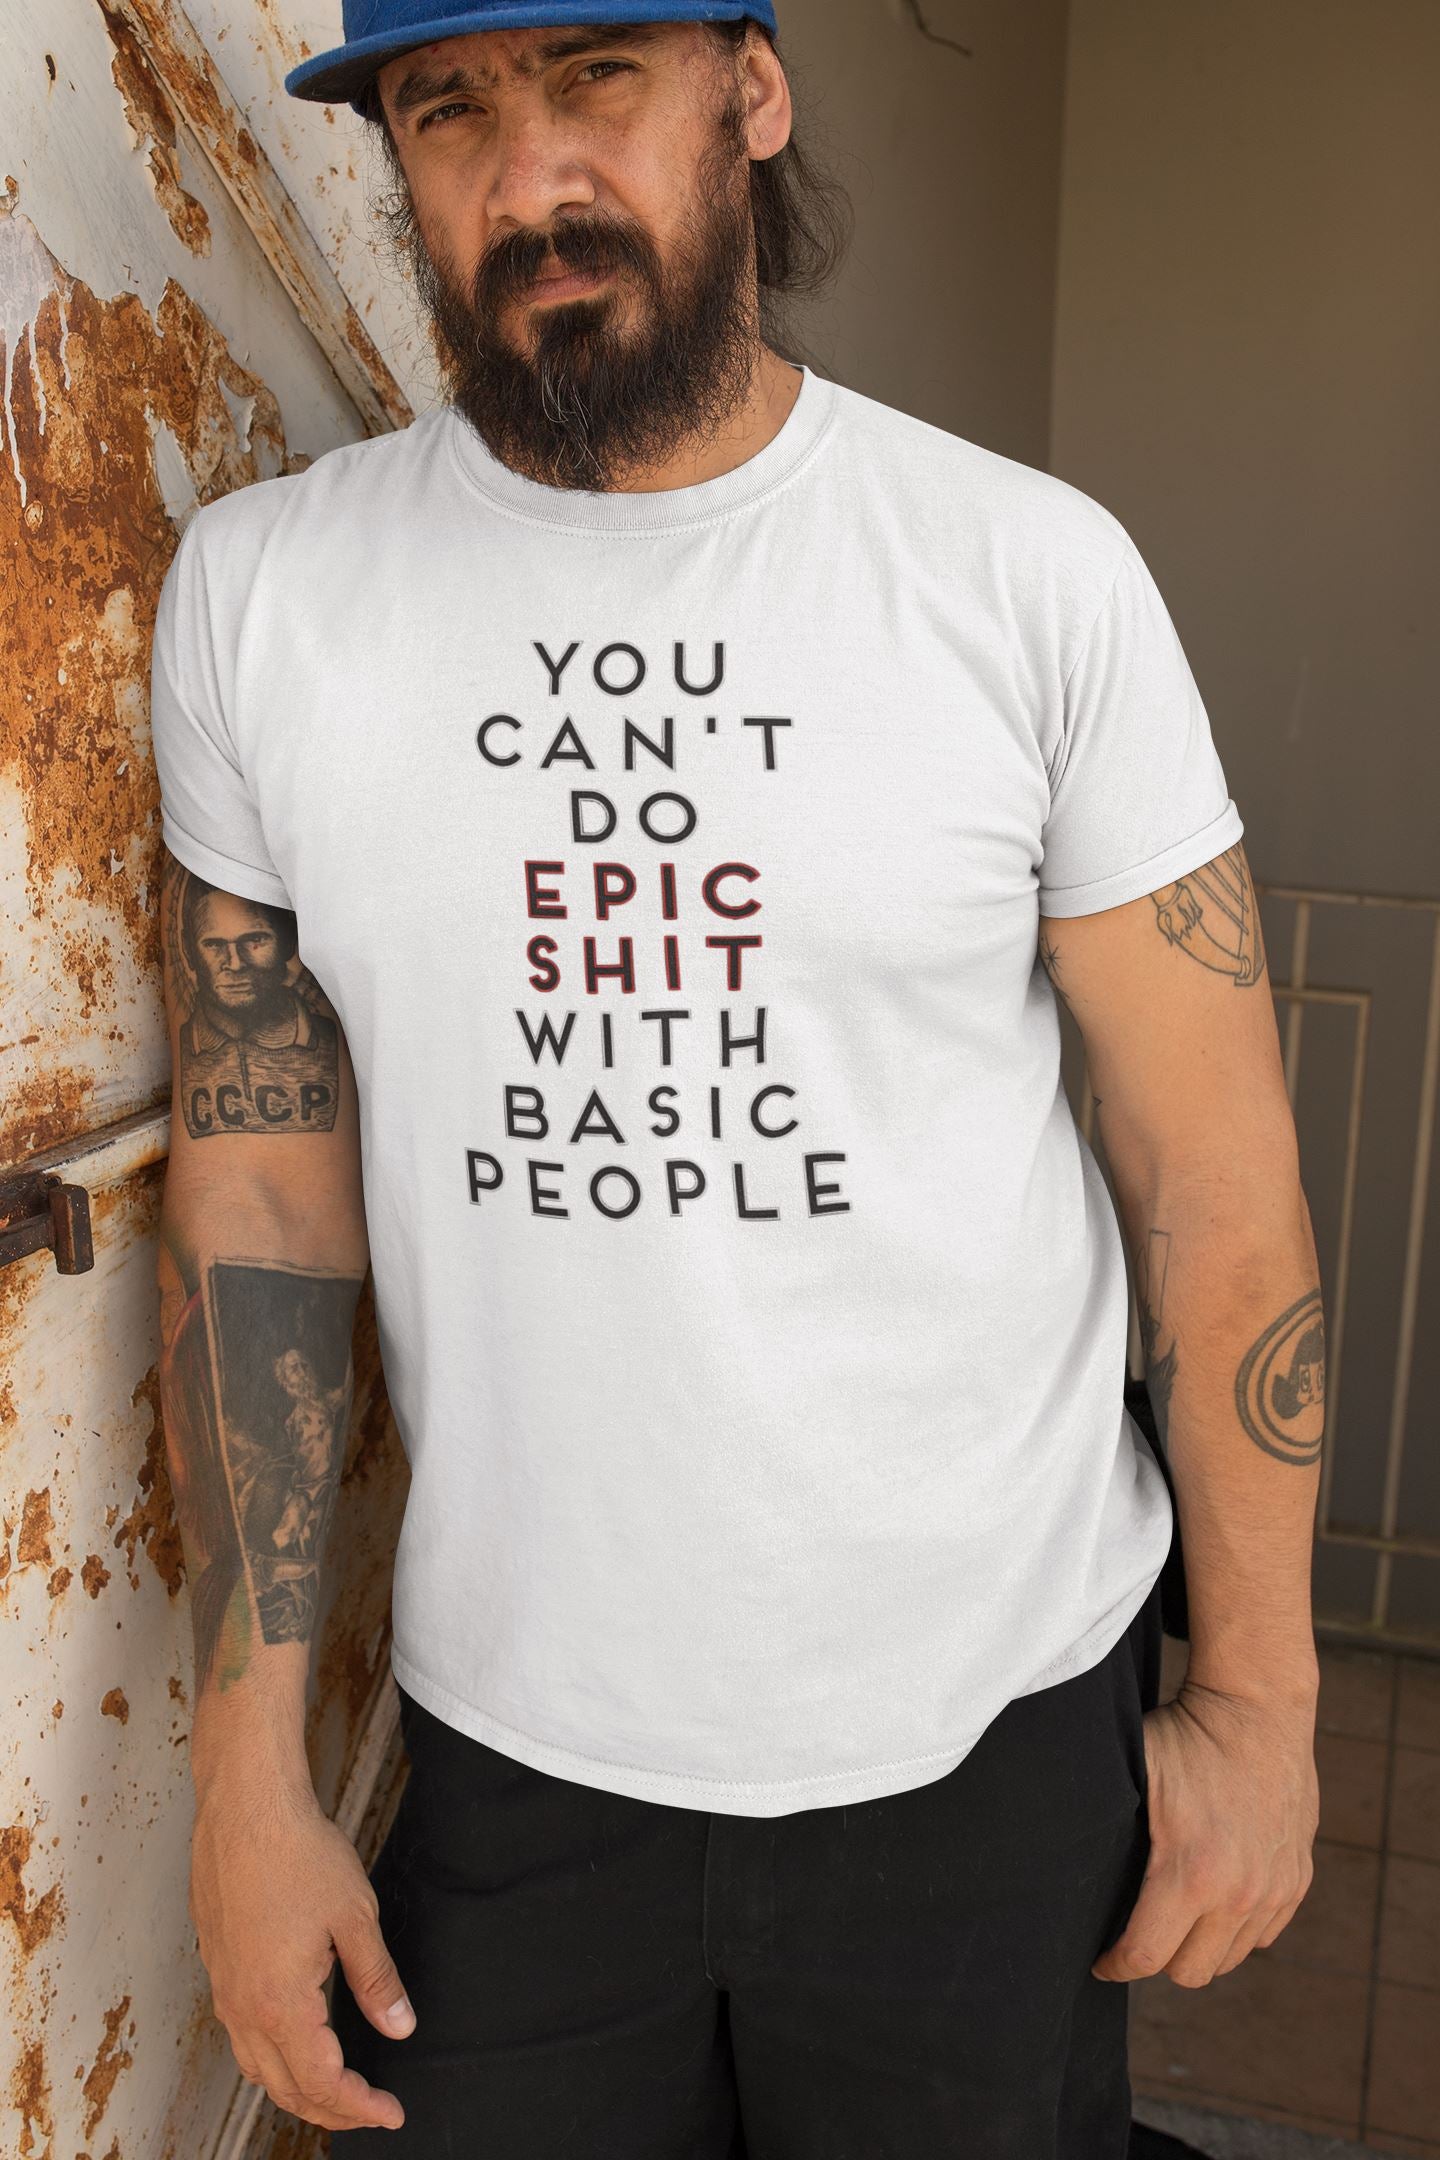 You Can't Do Epic Shit with Basic People Supreme White T Shirt for Men and Women freeshipping - Catch My Drift India